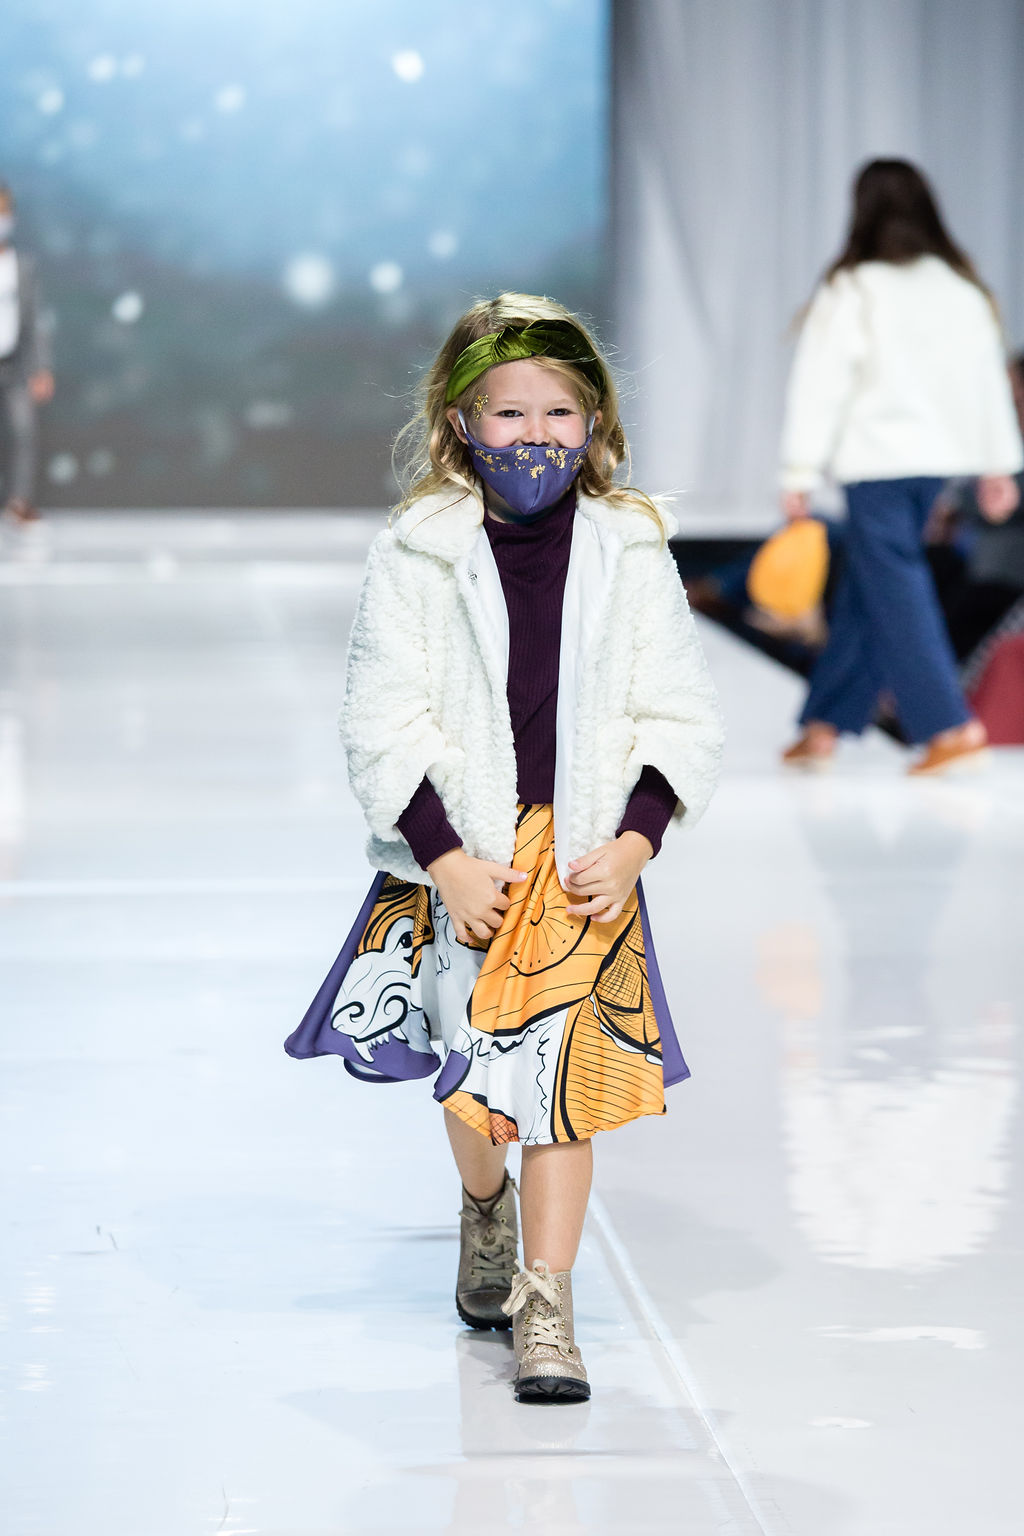 Young lady follows the runway in her purple knit tunic along with a lorek skirt and northern jacket